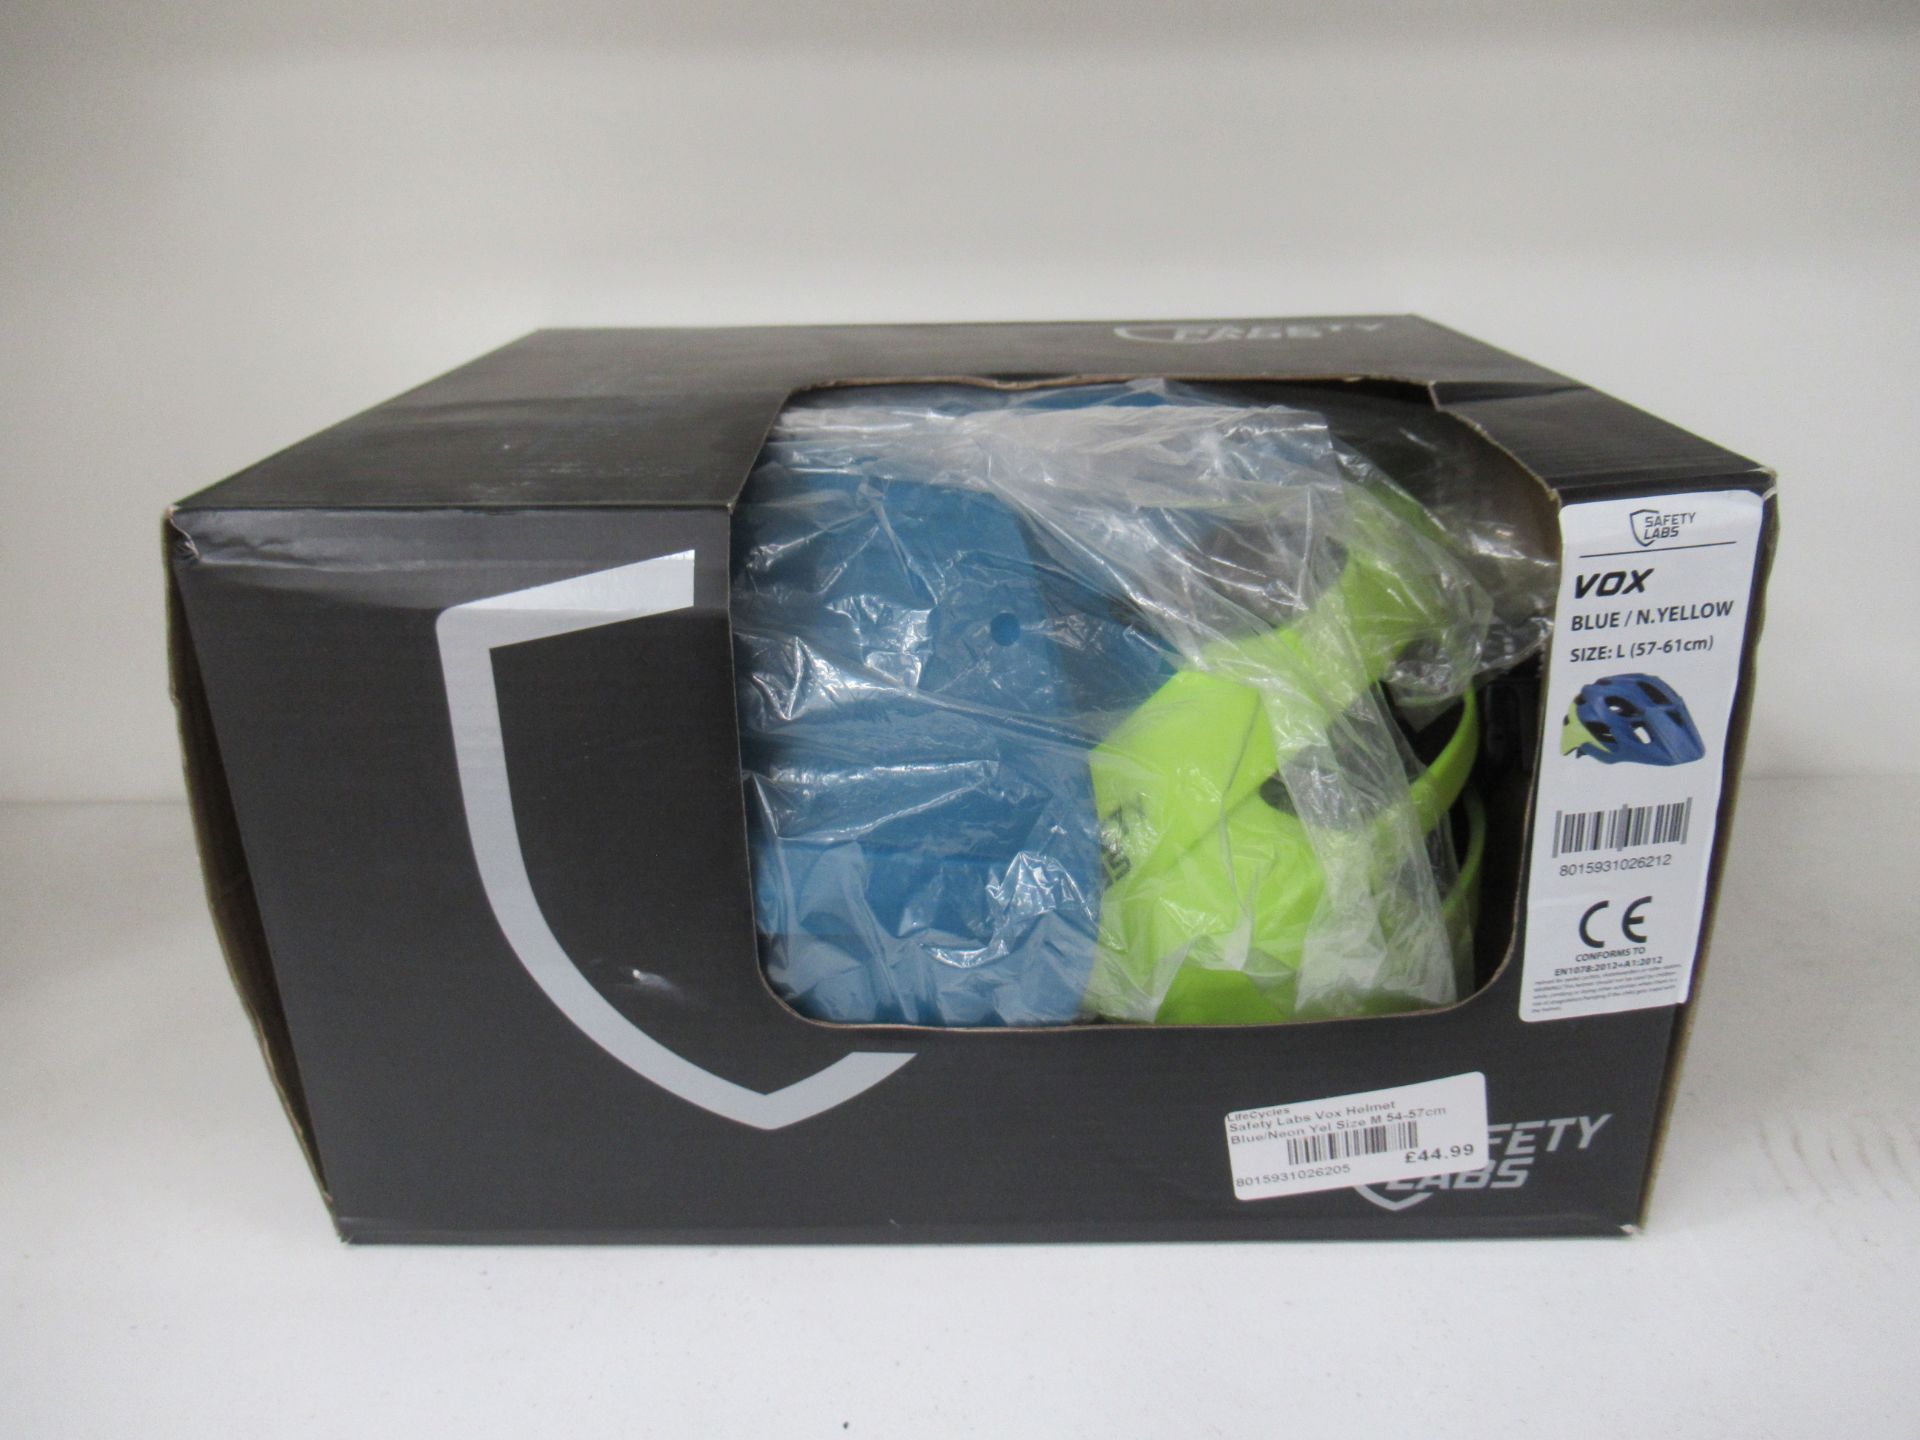 7 x cycling helmets - 3 x unboxed and 4 x Safety Labs VOX helmets: 3 x Blue/Neon Yellow (2 x medium; - Bild 8 aus 8